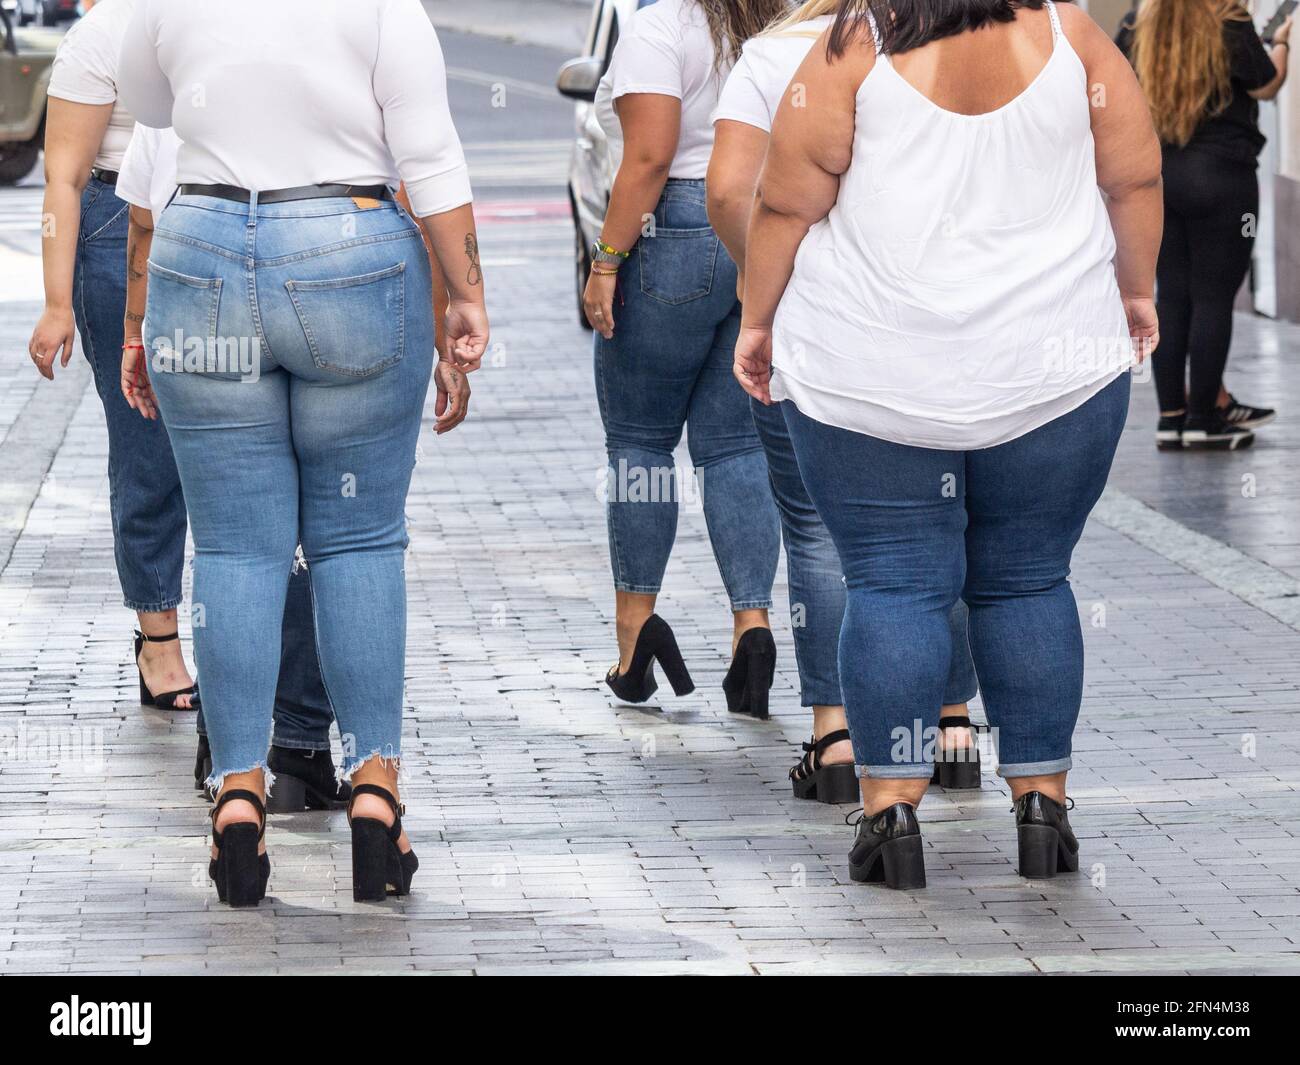 Mexican Fat ass at shoe store